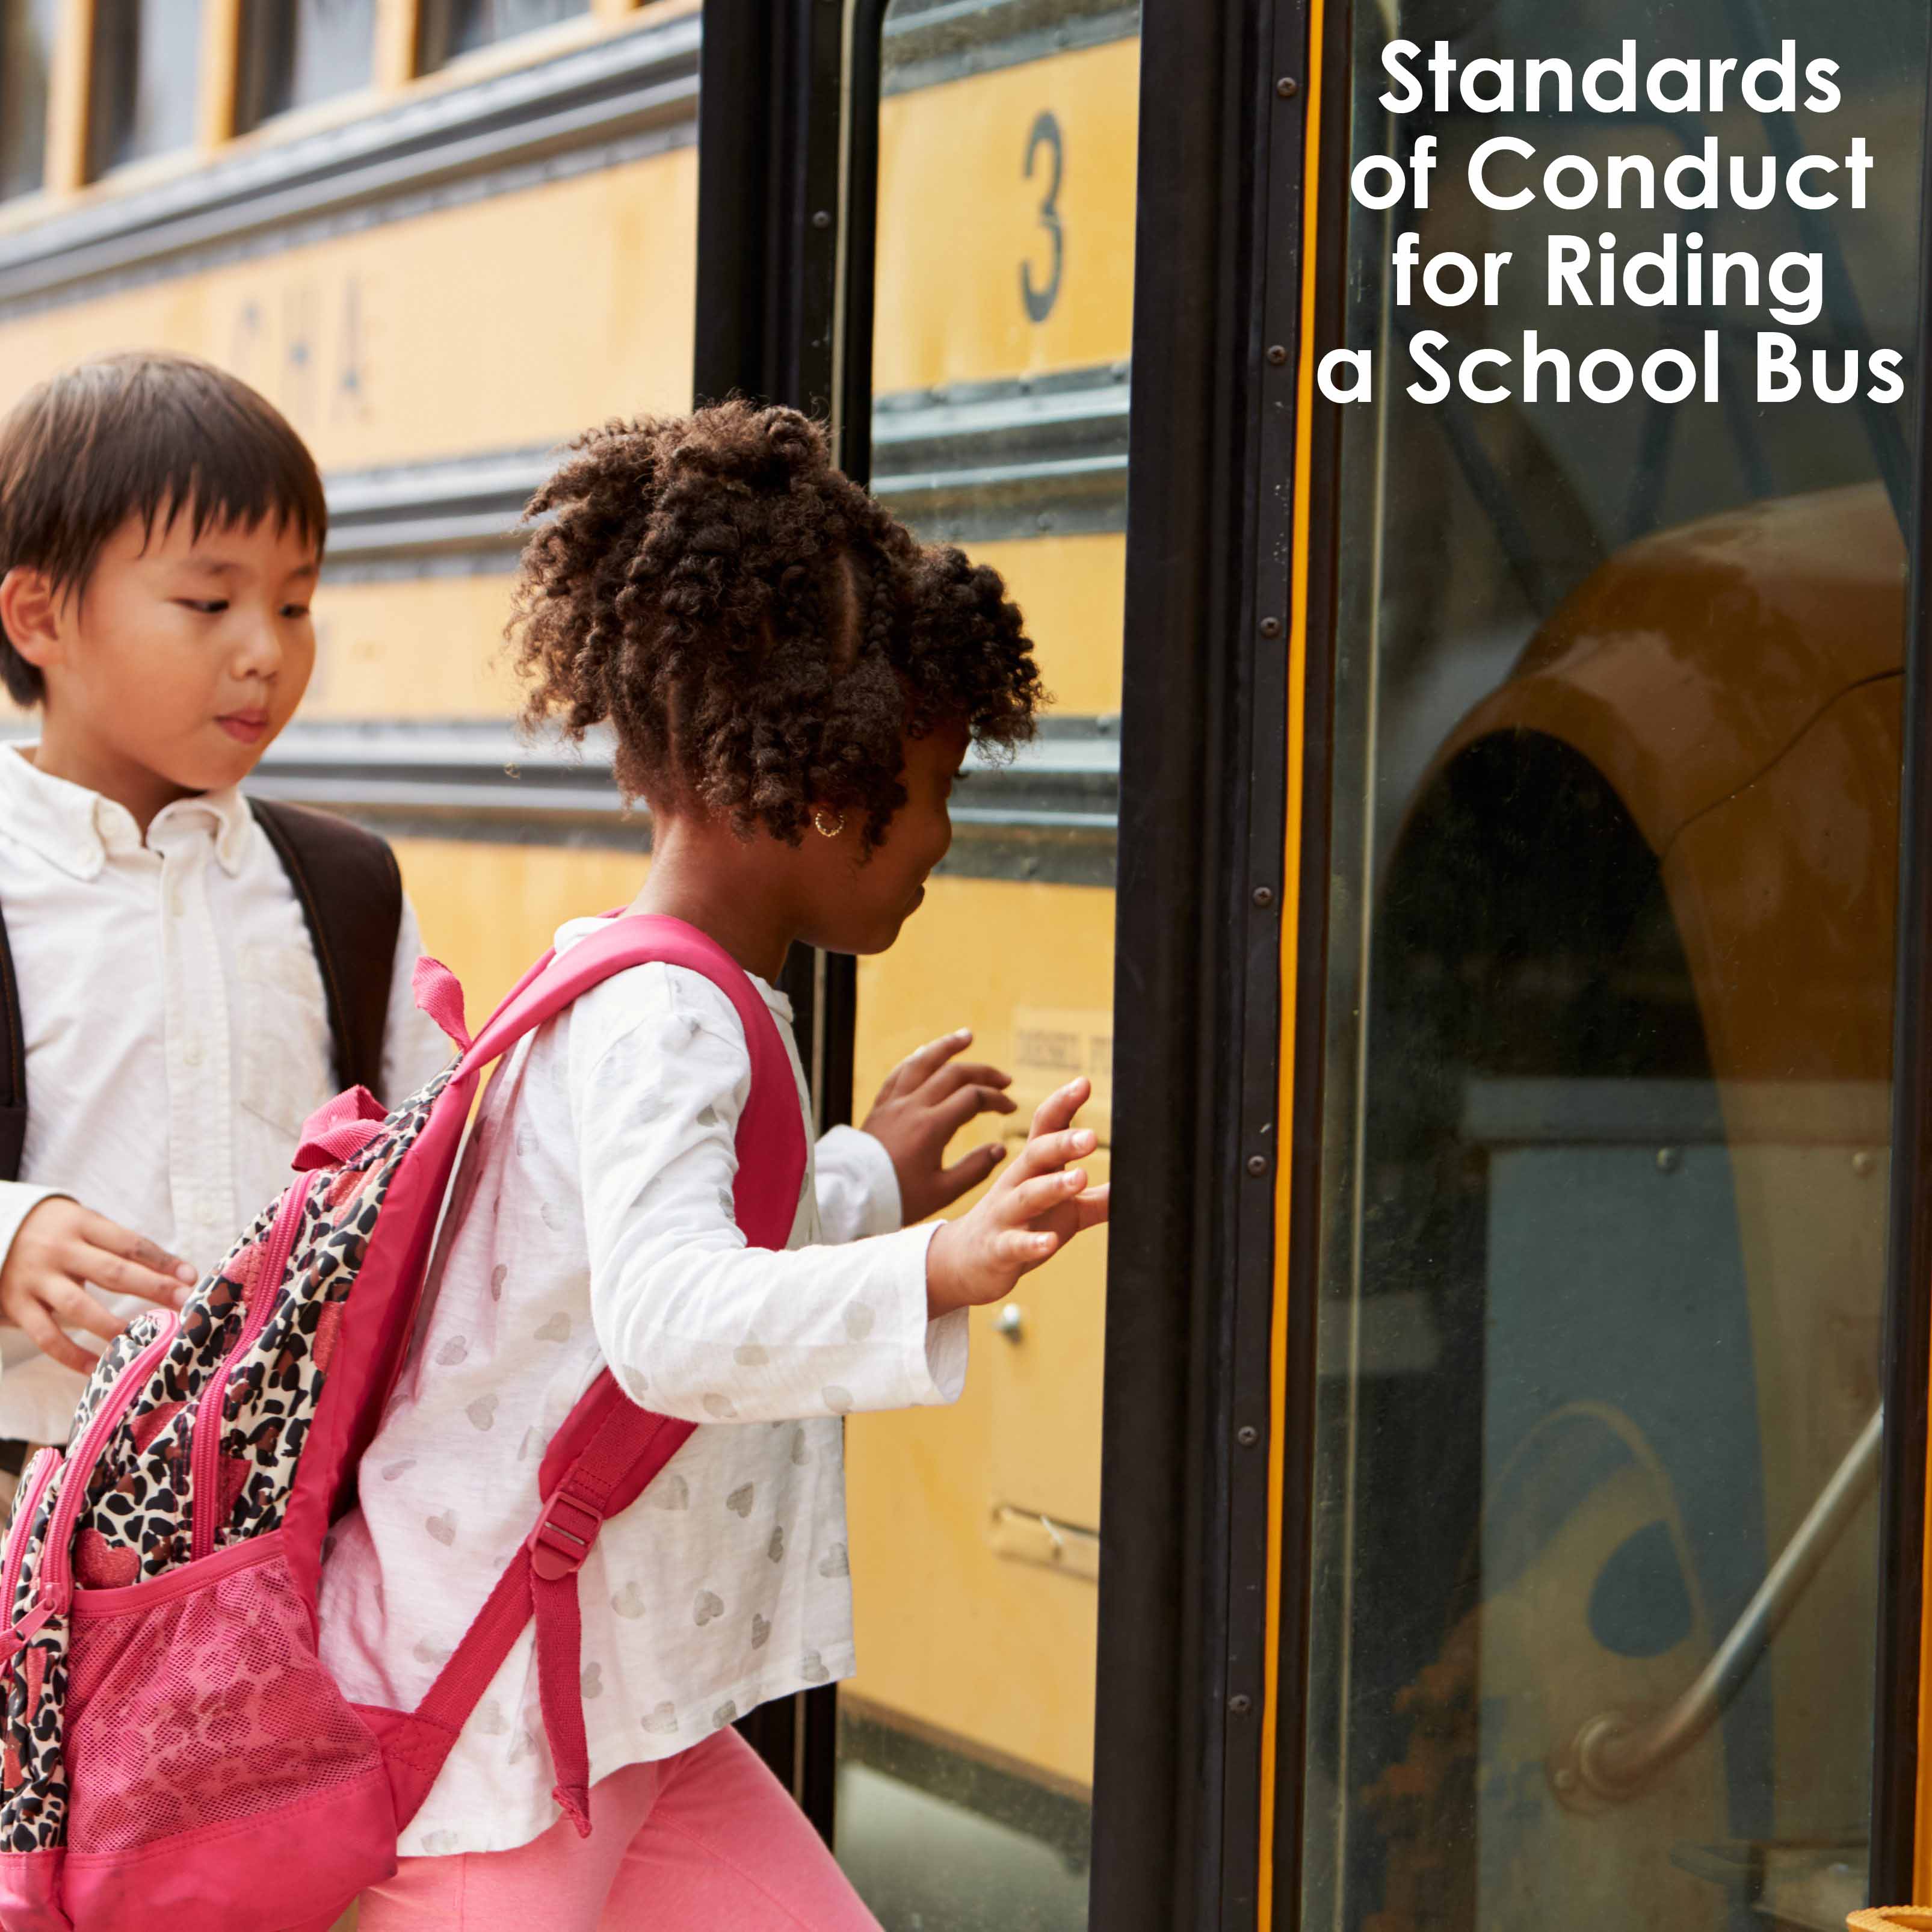 Standards of Conducts for Riding a School Bus